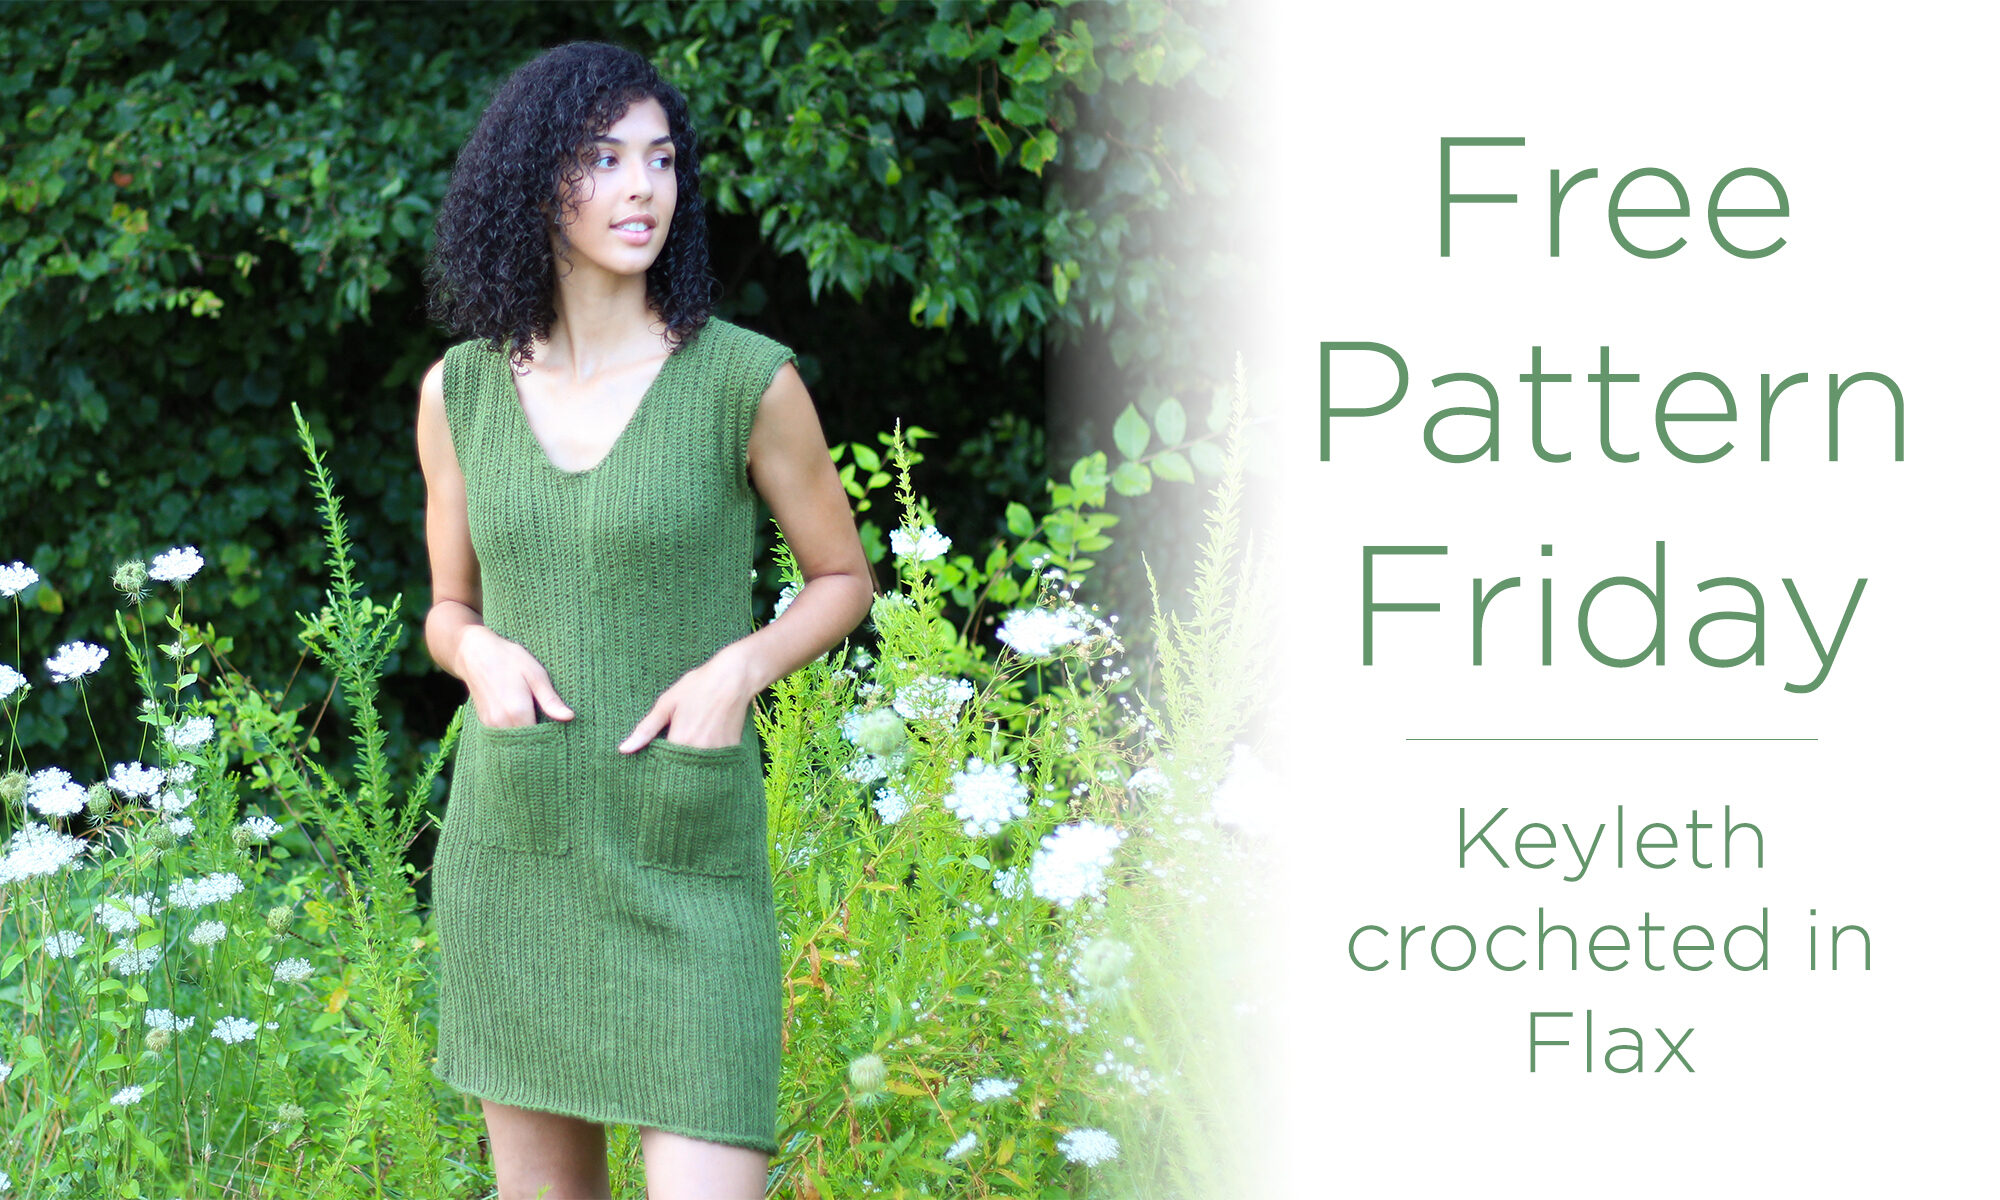 Photo of a person wearing the Keyleth dress in a field of grass with text to the right saying "Free Pattern Friday - Keyleth crocheted in Flax"